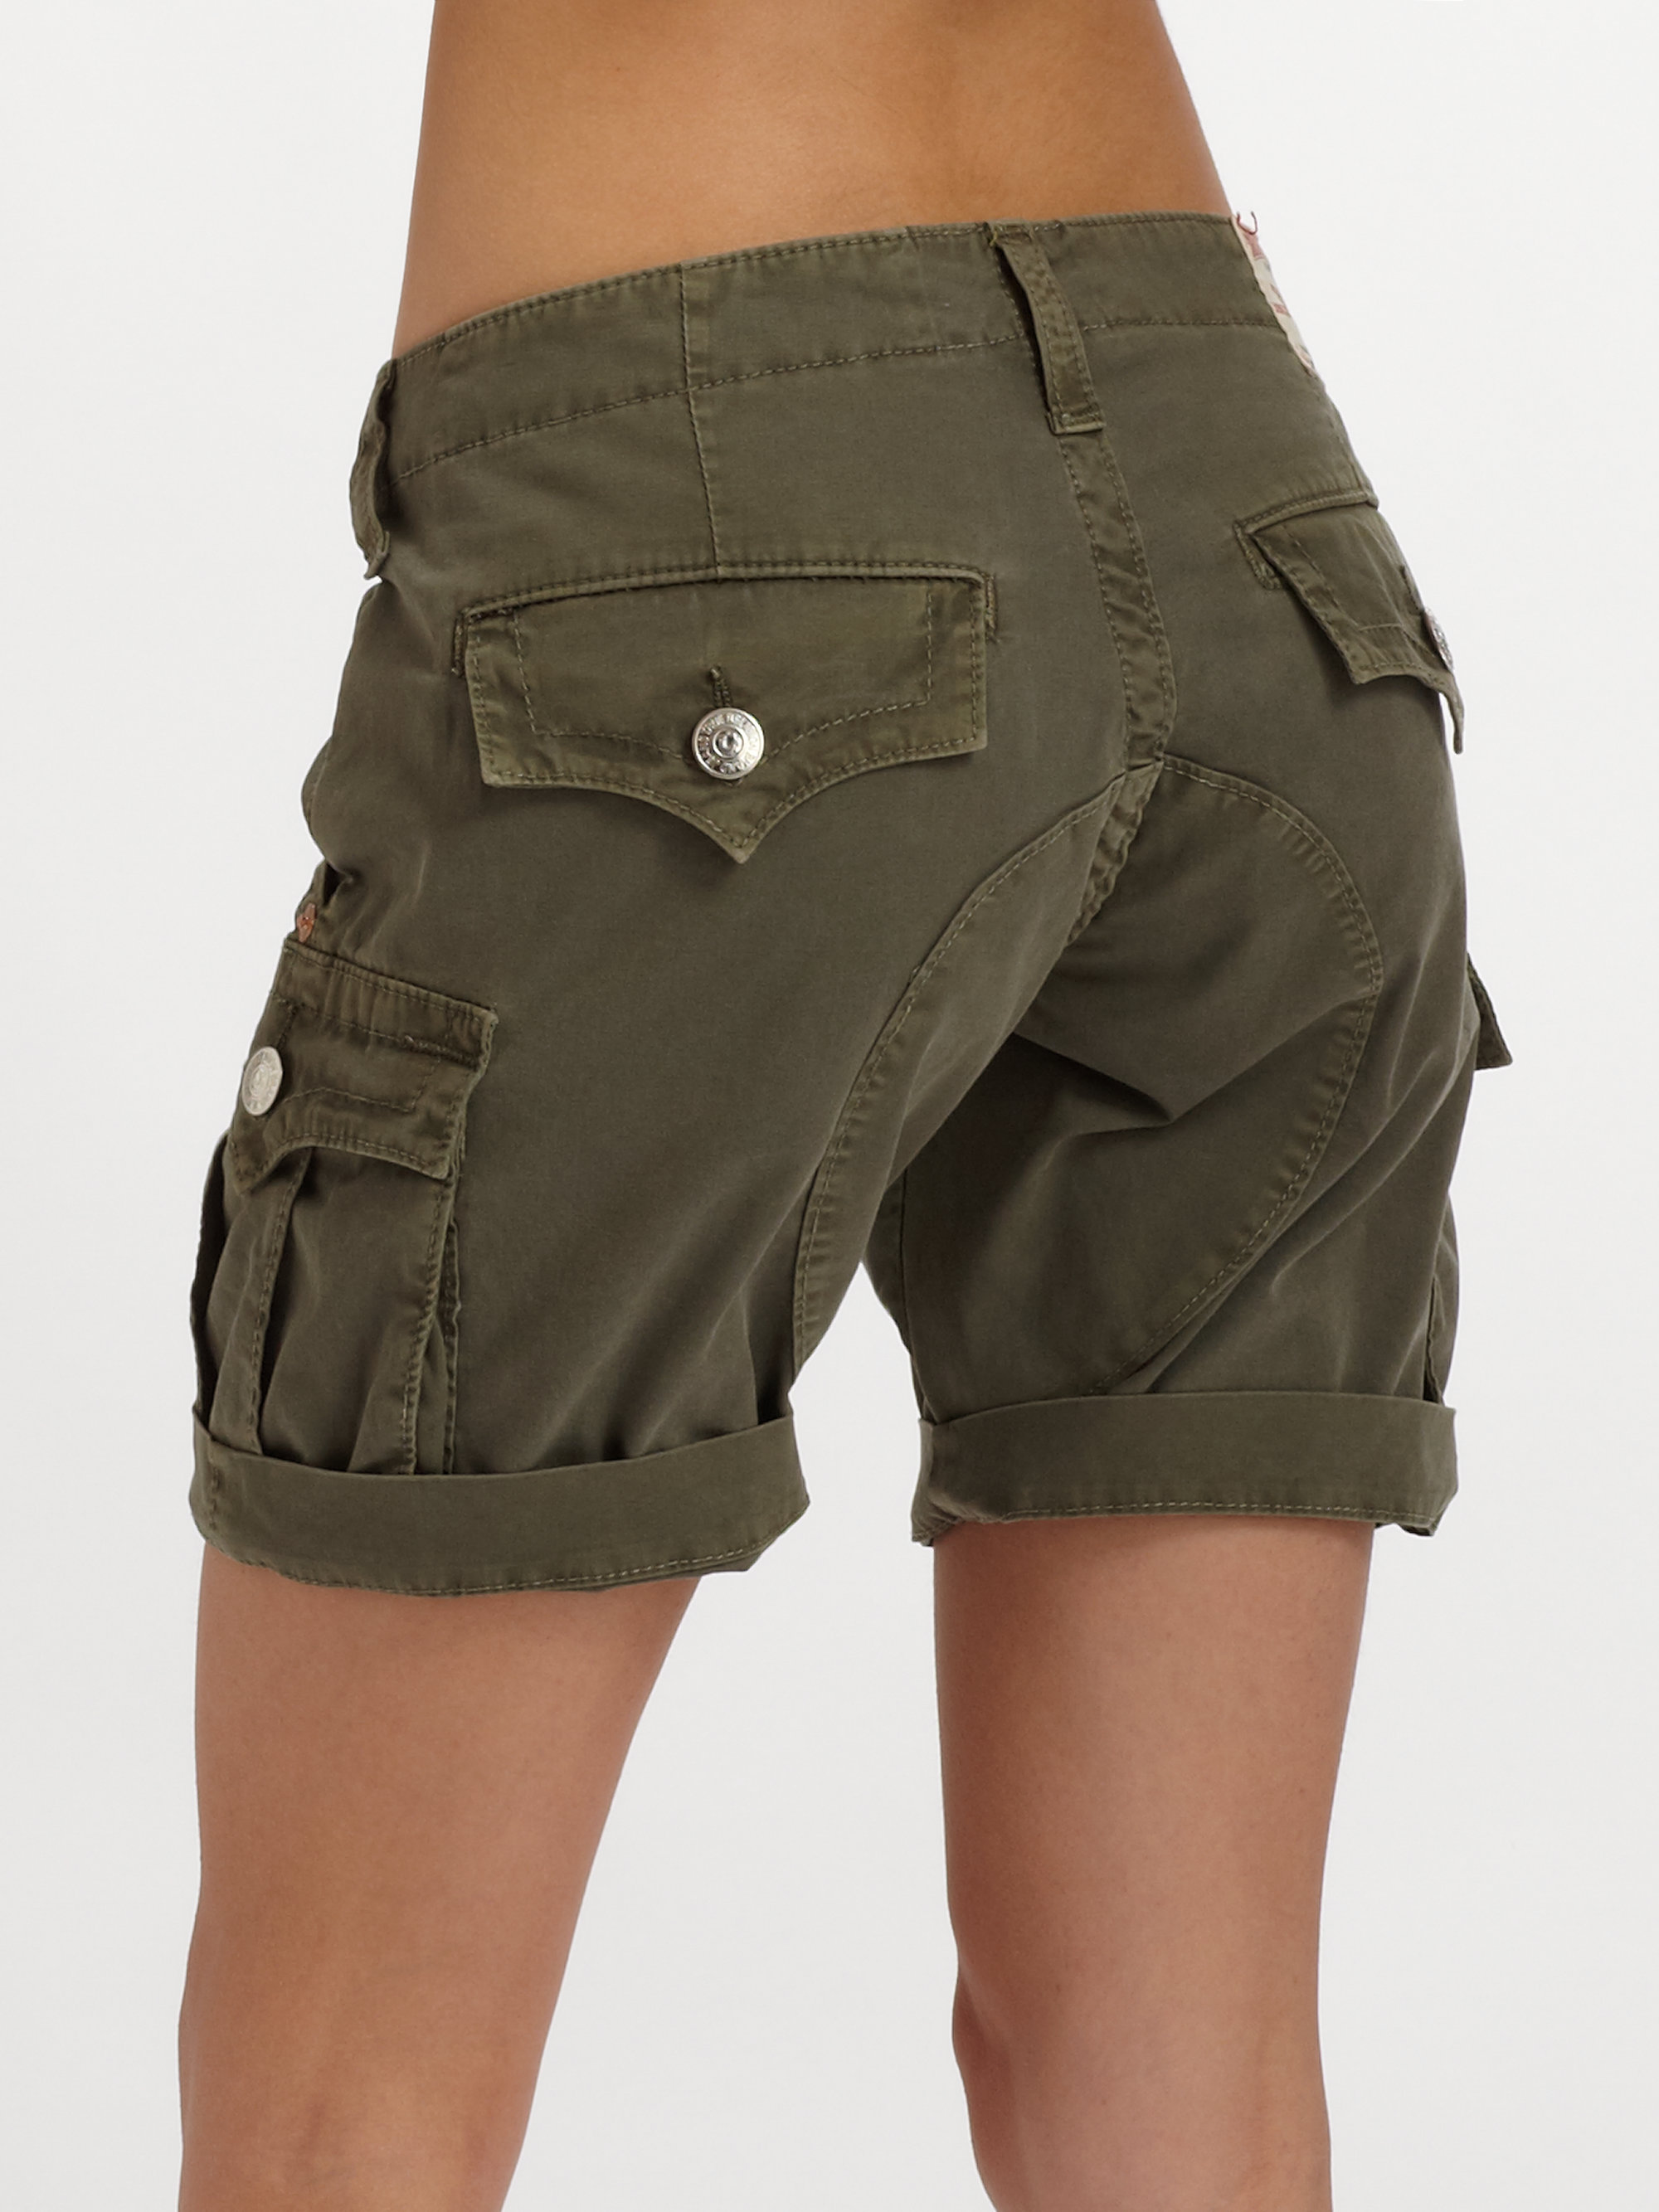 Army Green Cargo Shorts Womens - Army Military